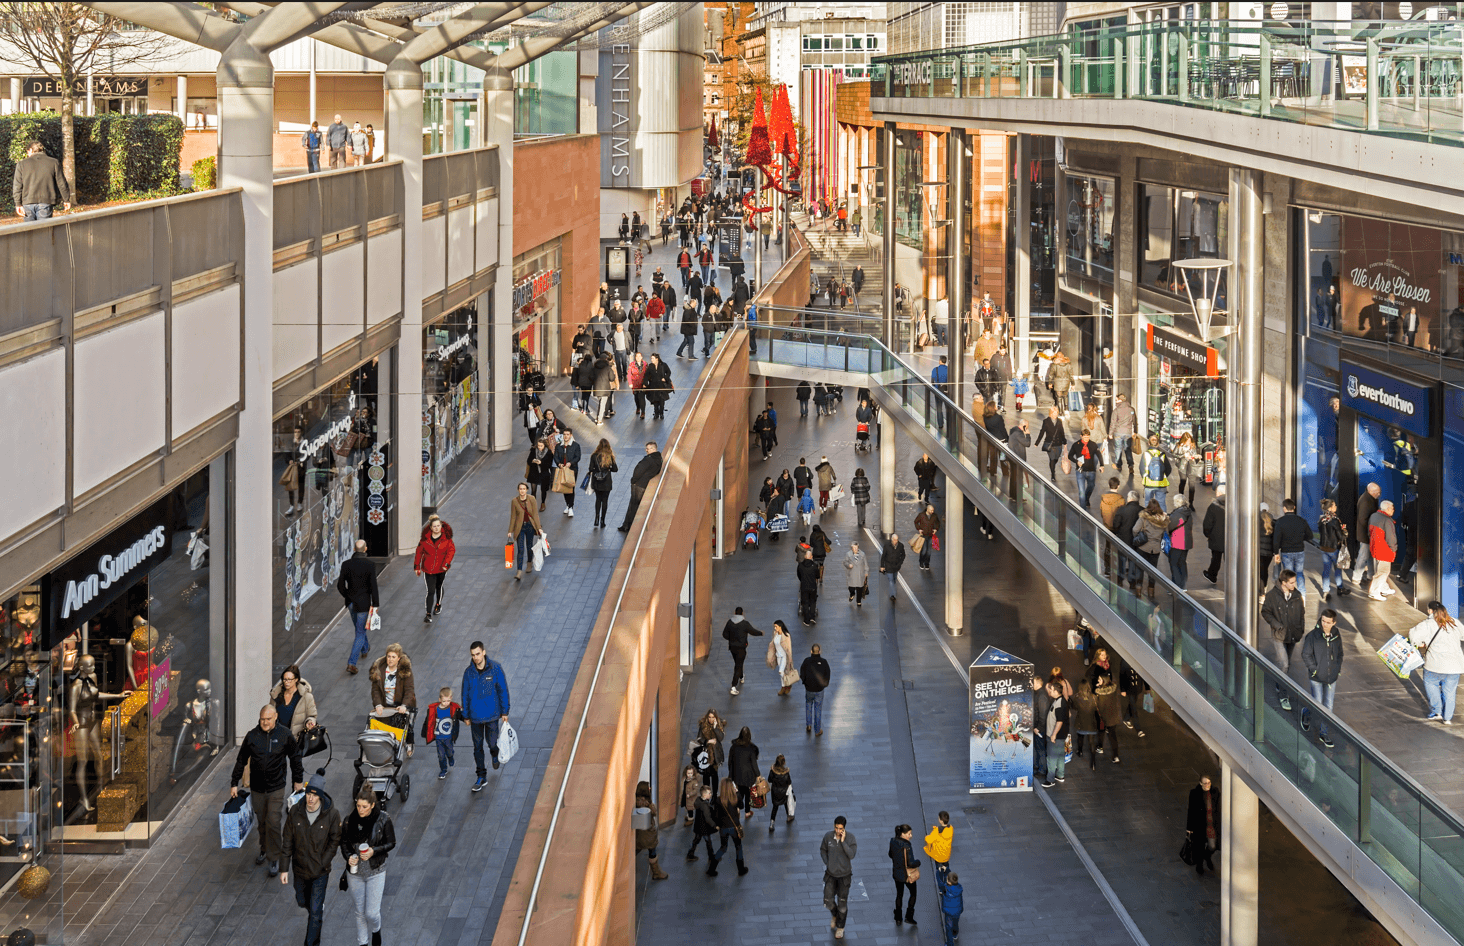 3 Advice to Ensure Efficiency & Safety at Shopping Malls during Holiday Seasons